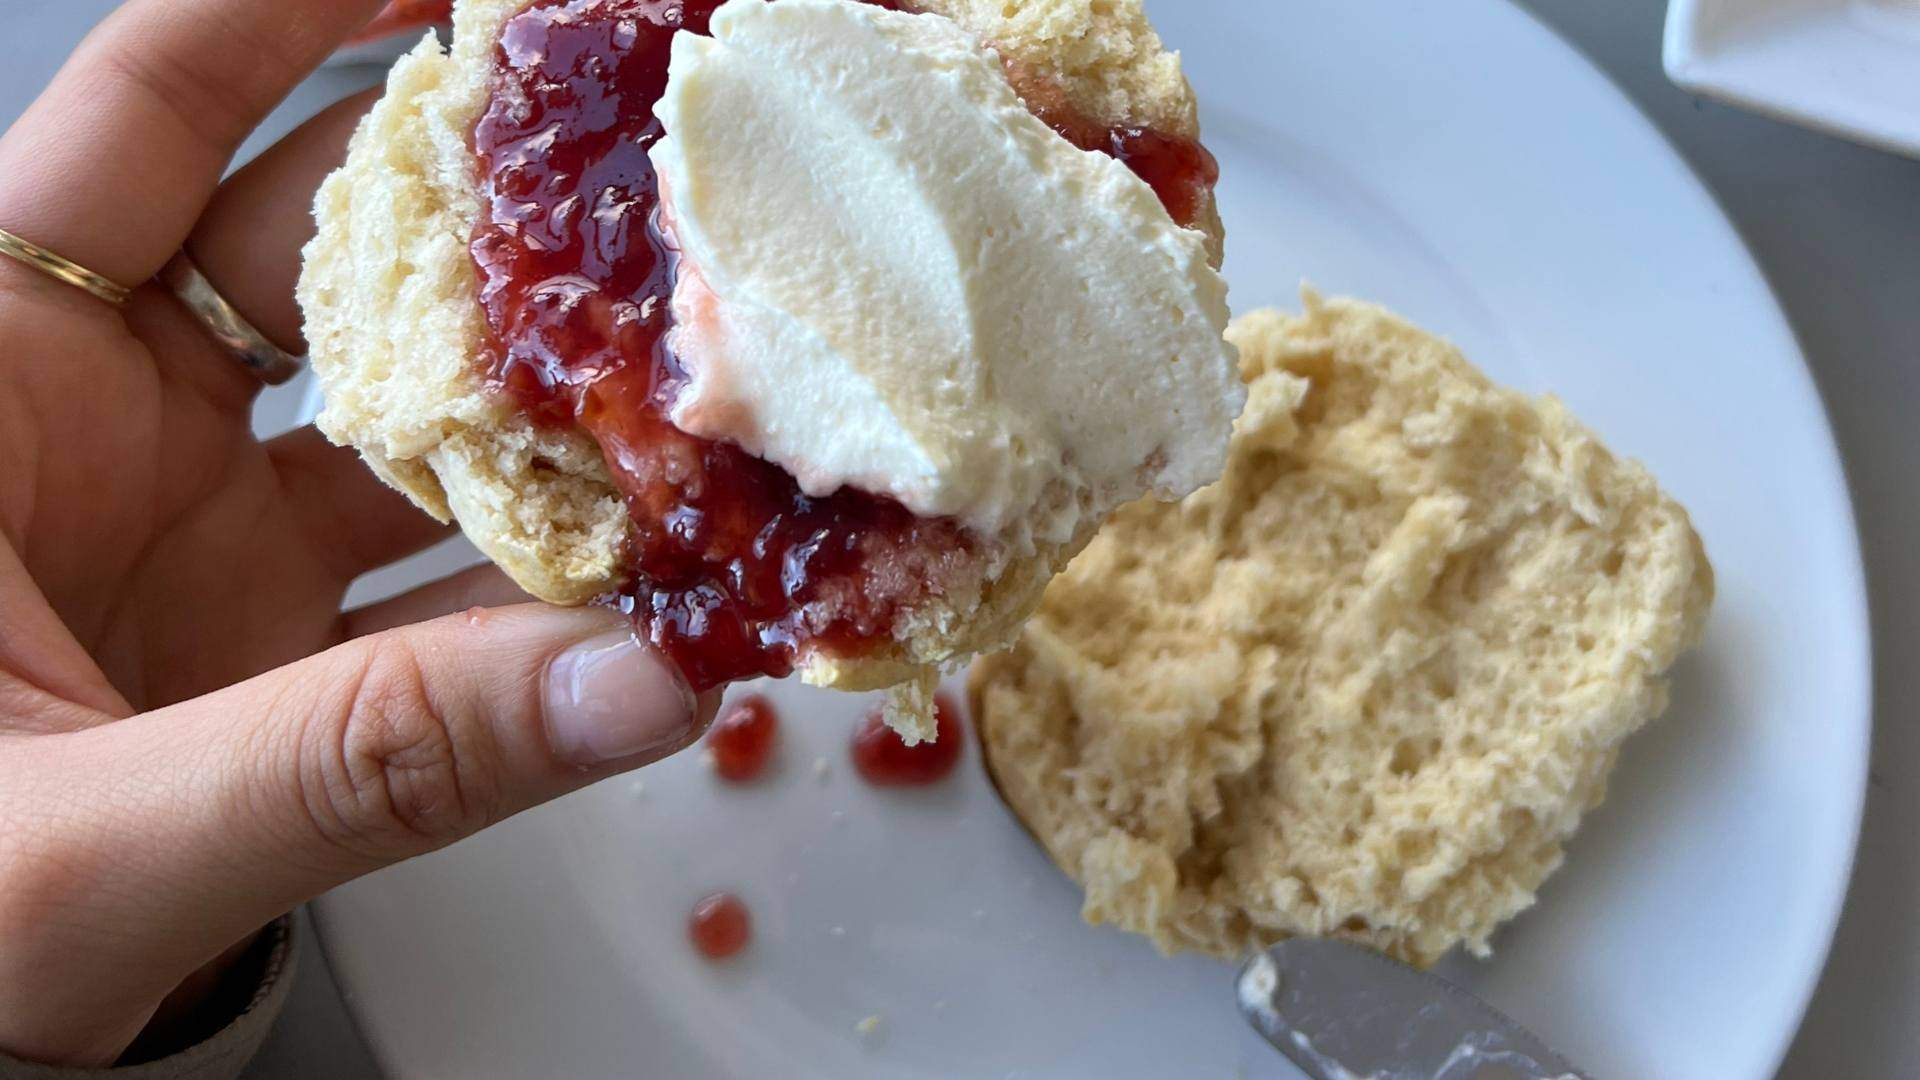 A fresh scone covered with a layer of strawberry jam and a dollop of cream from the Lightkeepers Cafe, the cafe at the Cape Otway Lightstation in Victoria